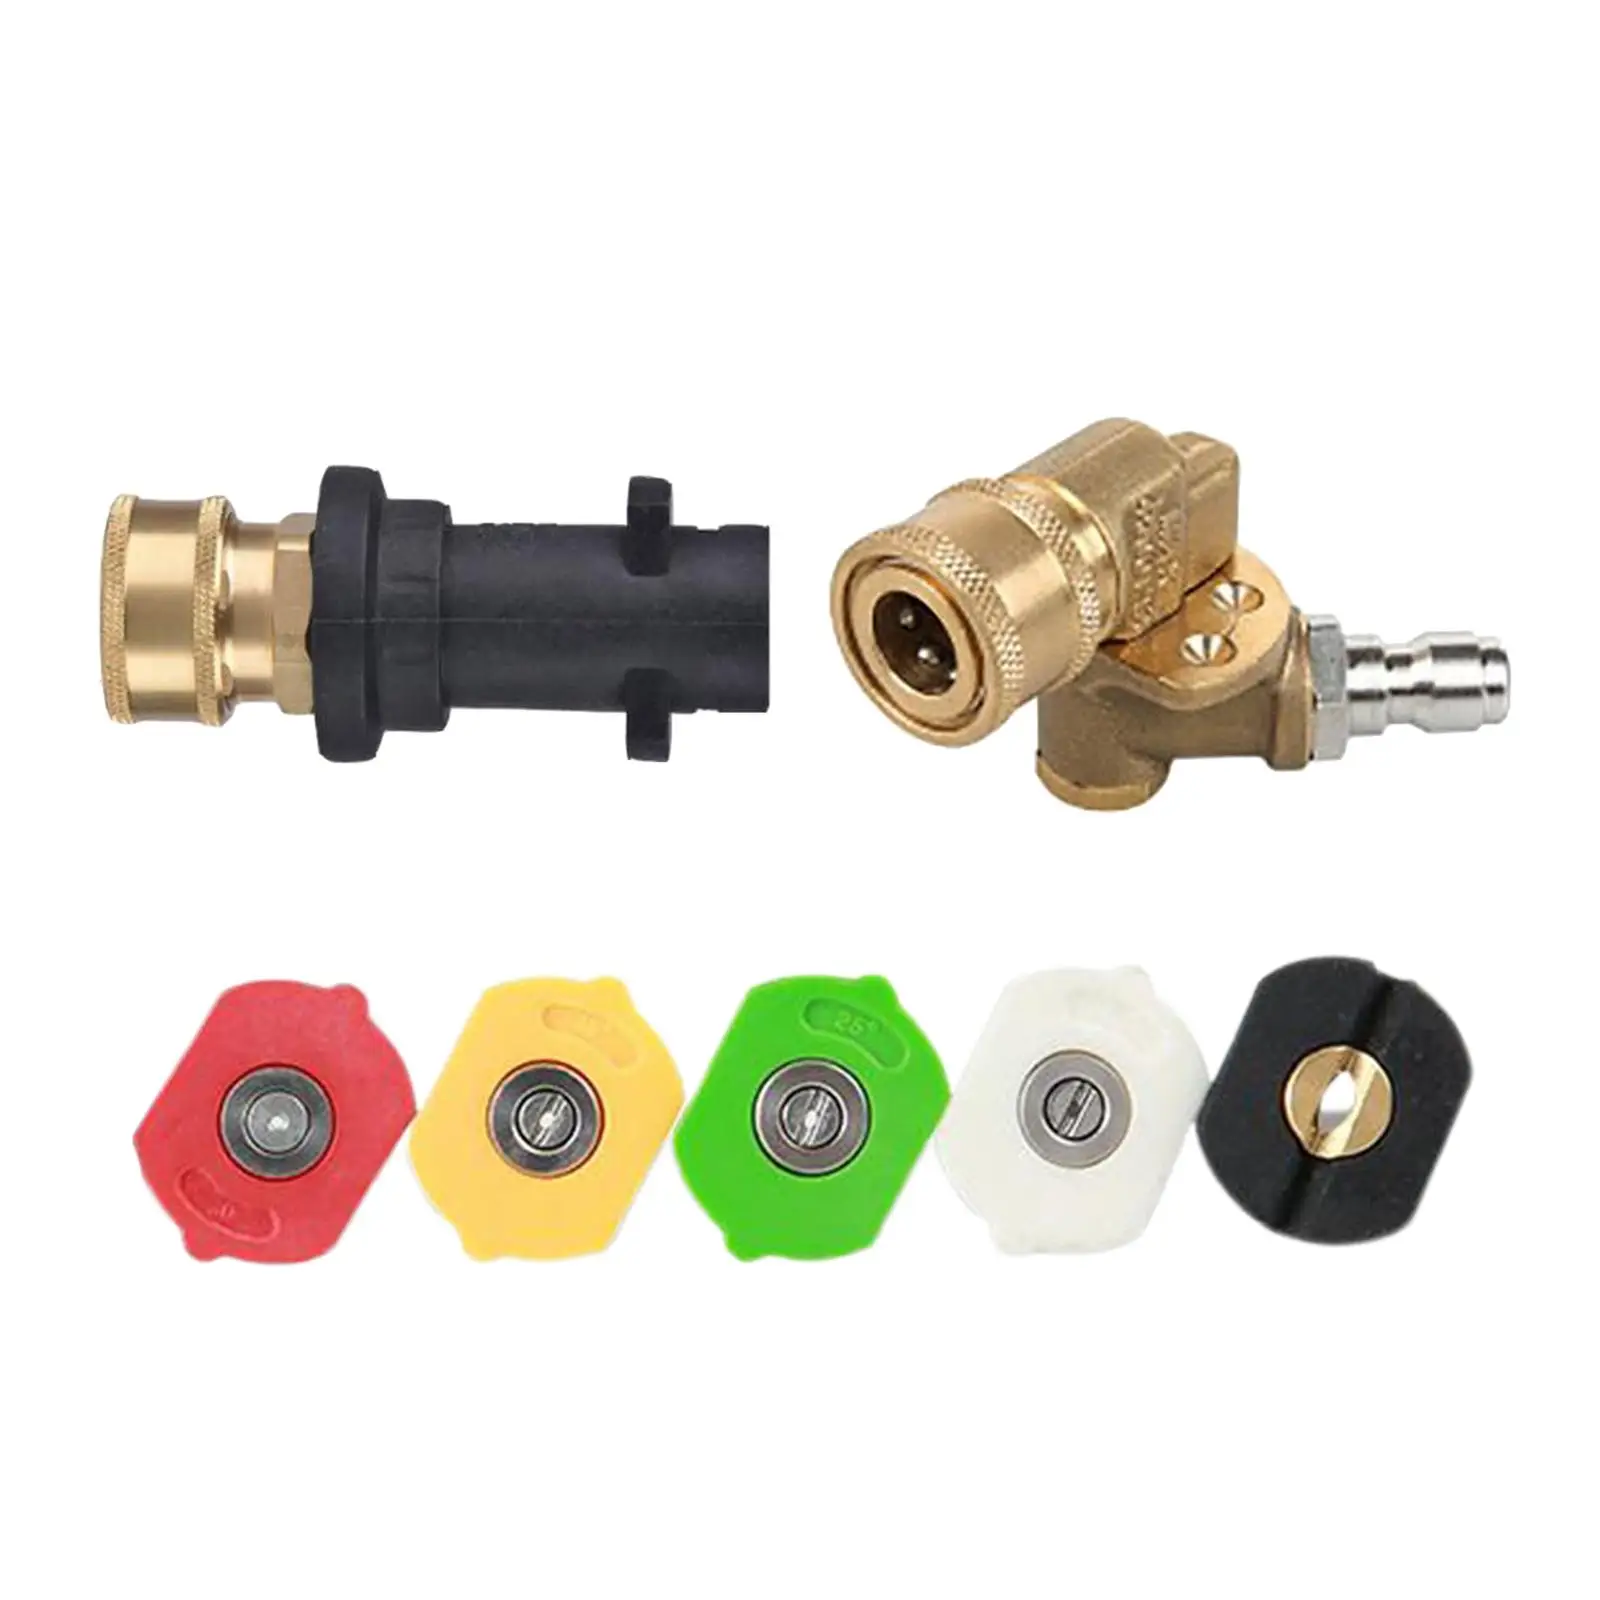 

High Pressure Washer Adapter Easy Installation 7 Gear Connector 1/4in Quick Connect Fitting Set for Home Cleaning Plant Watering